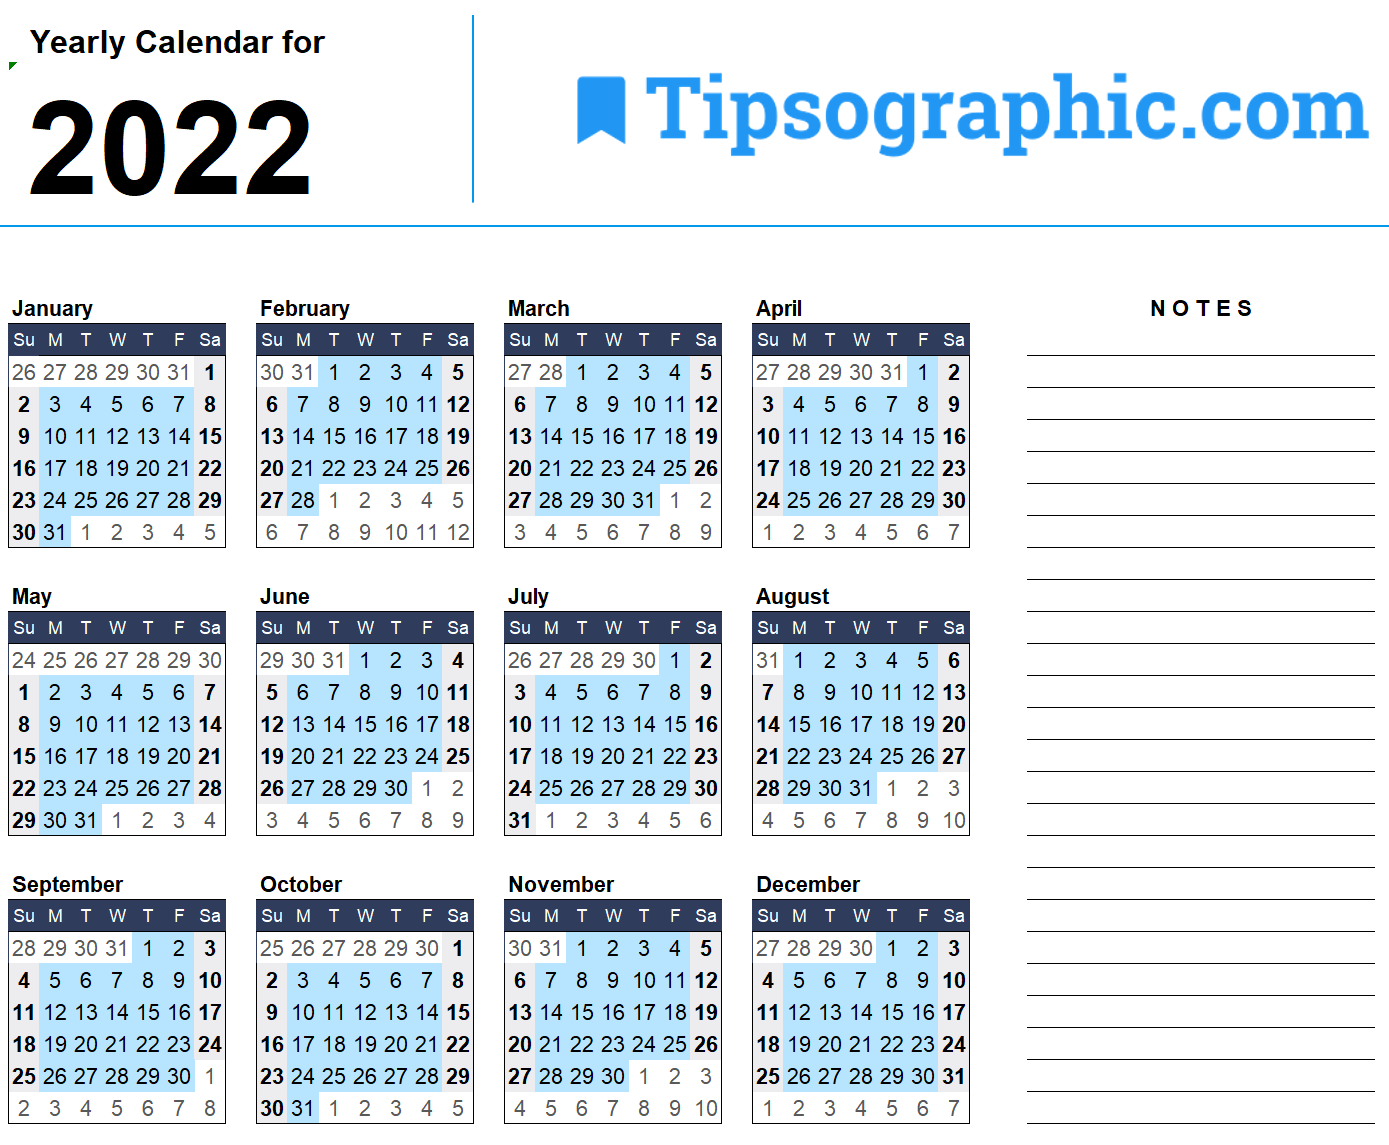 2022 Calendar Templates & Images | Tipsographic